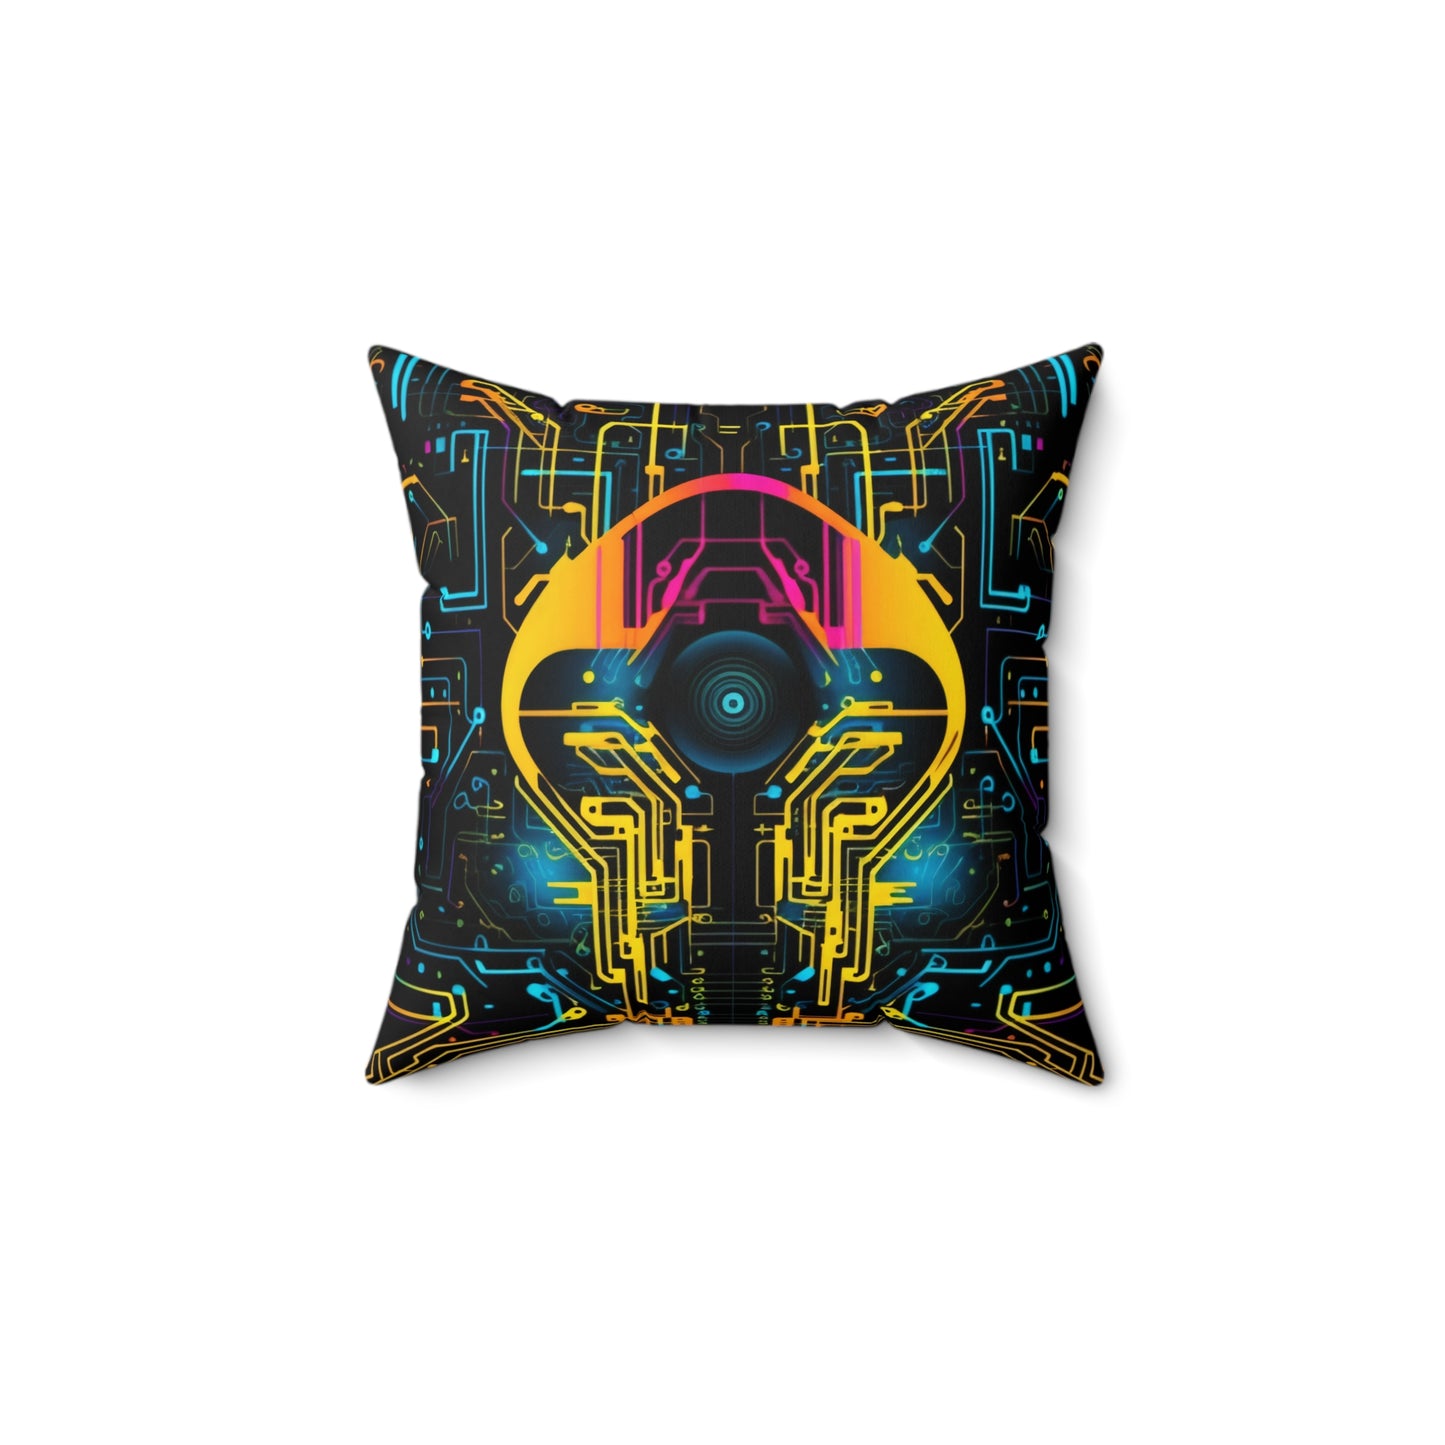 Cyberpunk Pillow, Yellow Robotic Circuit Board Throw Pillow, Tech Game Room Decor, Unique Square Cushion, Concealed Zipper